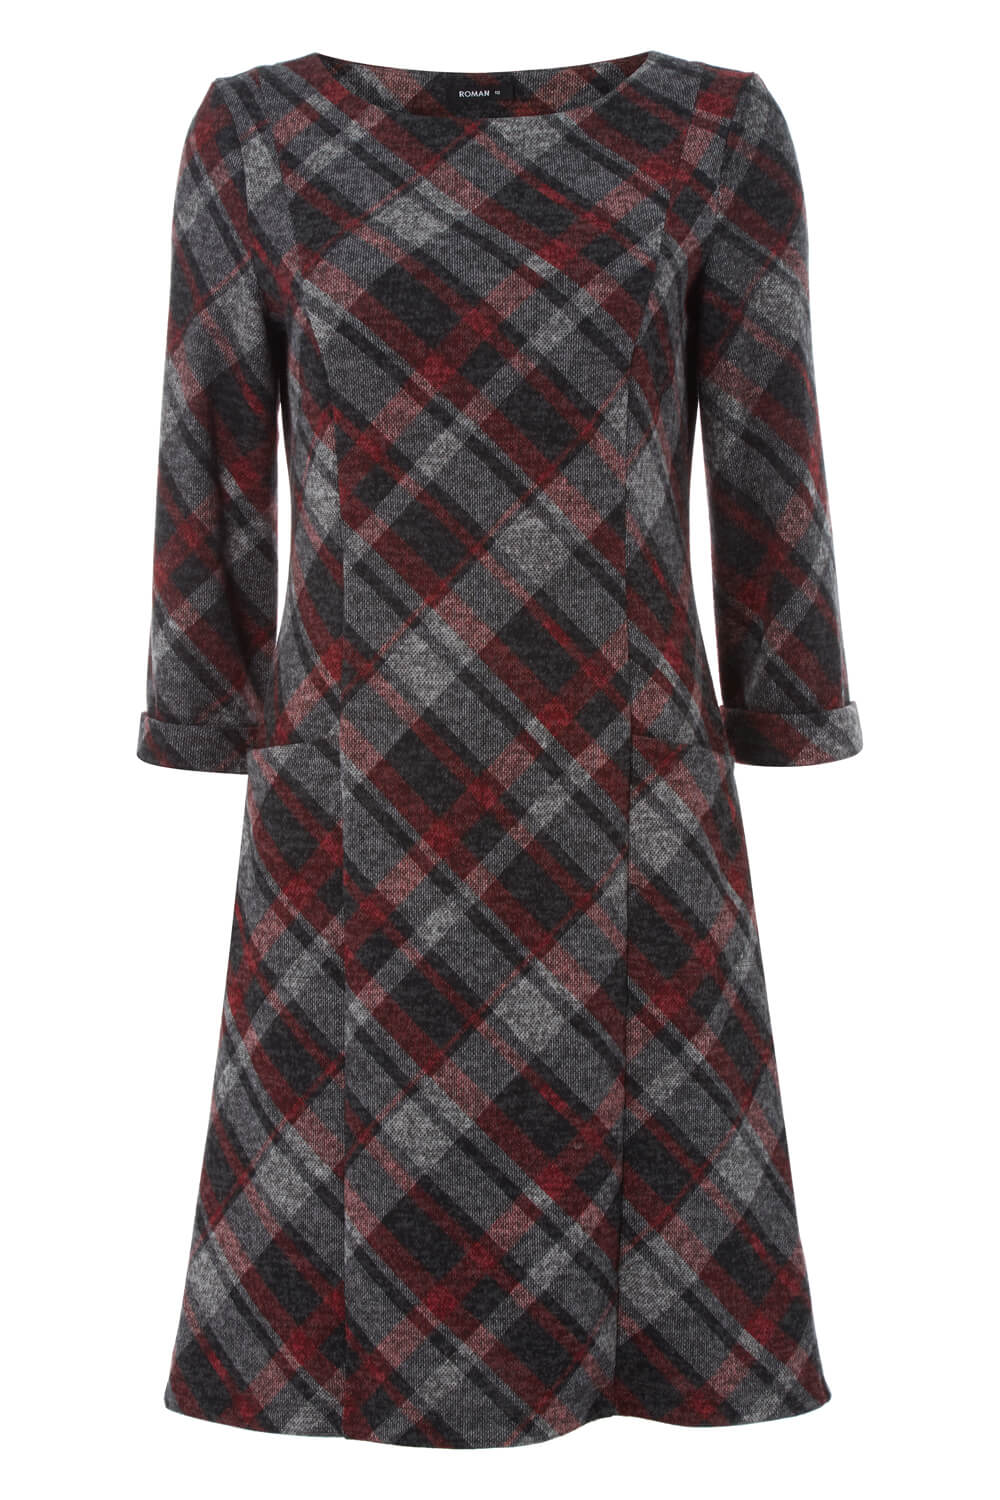 Red Check Print 3/4 Sleeve Shift Dress, Image 4 of 4